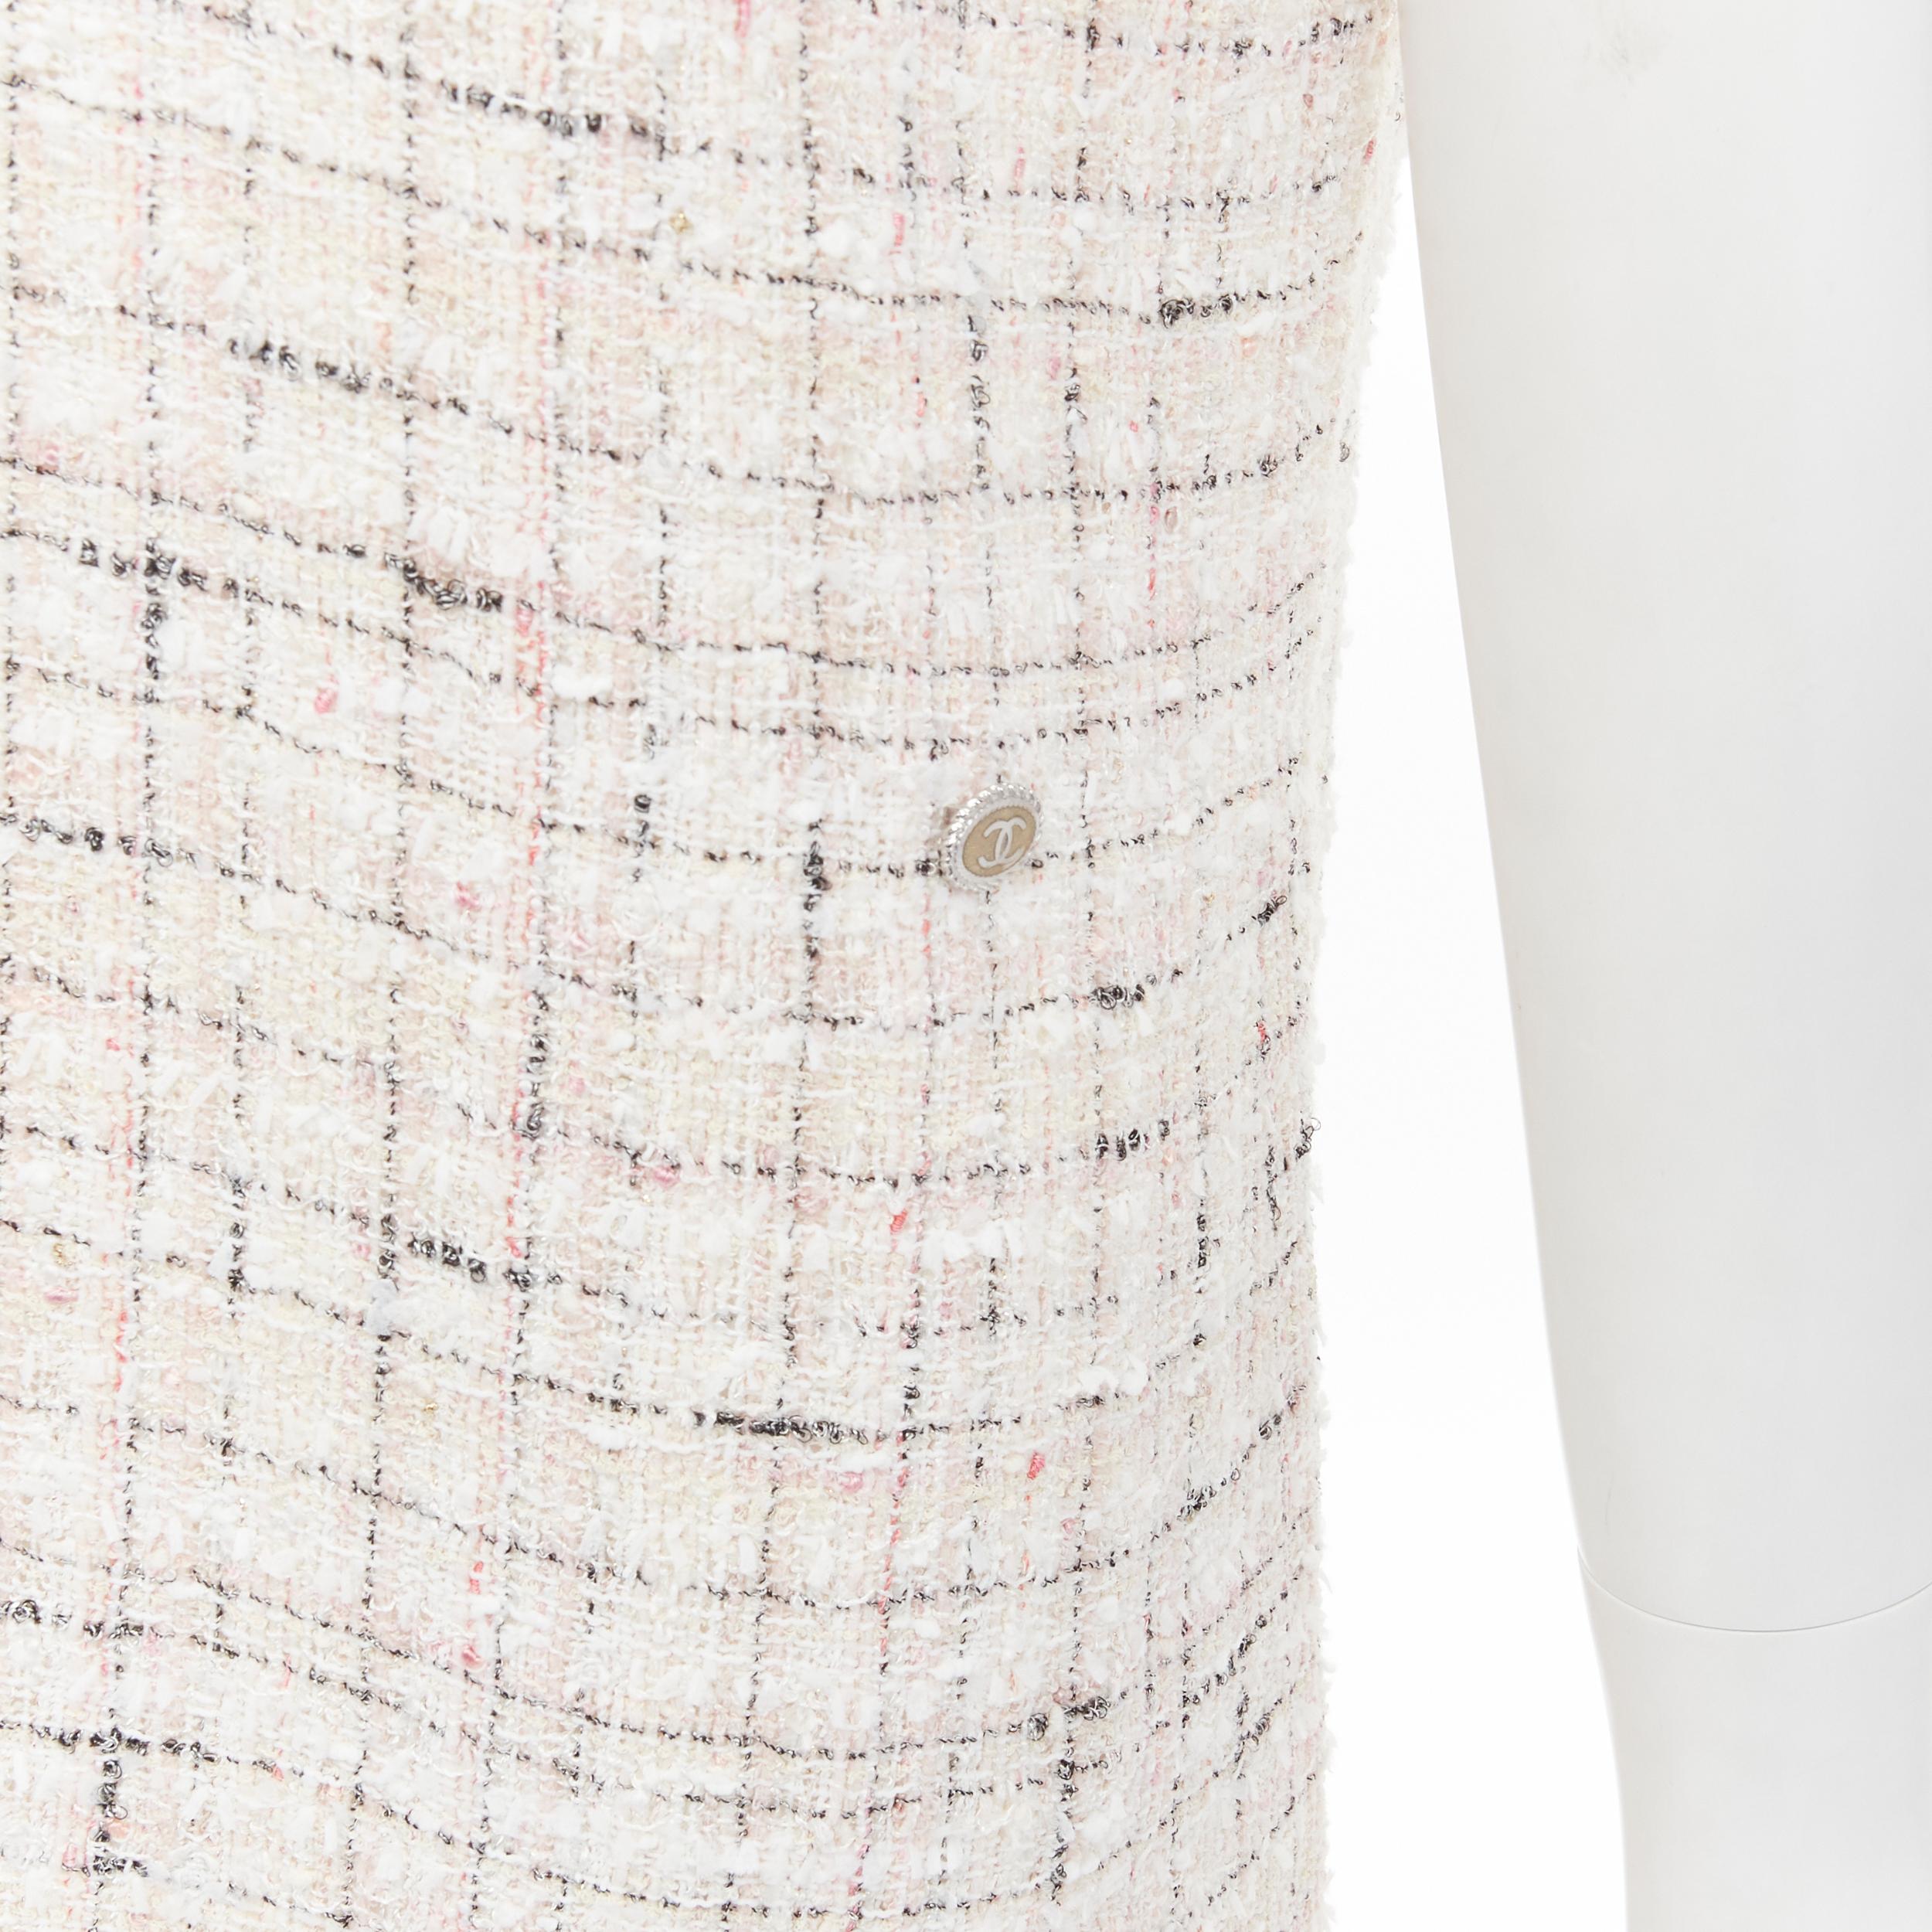 CHANEL light pink beige black check tweed short sleeve sheath dress FR38 M
Brand: Chanel
Material: Tweed
Color: Pink
Pattern: Checkered
Closure: Zip
Extra Detail: Light pink and black check tweed. Silver CC charm at front waist. Fully lined in nude